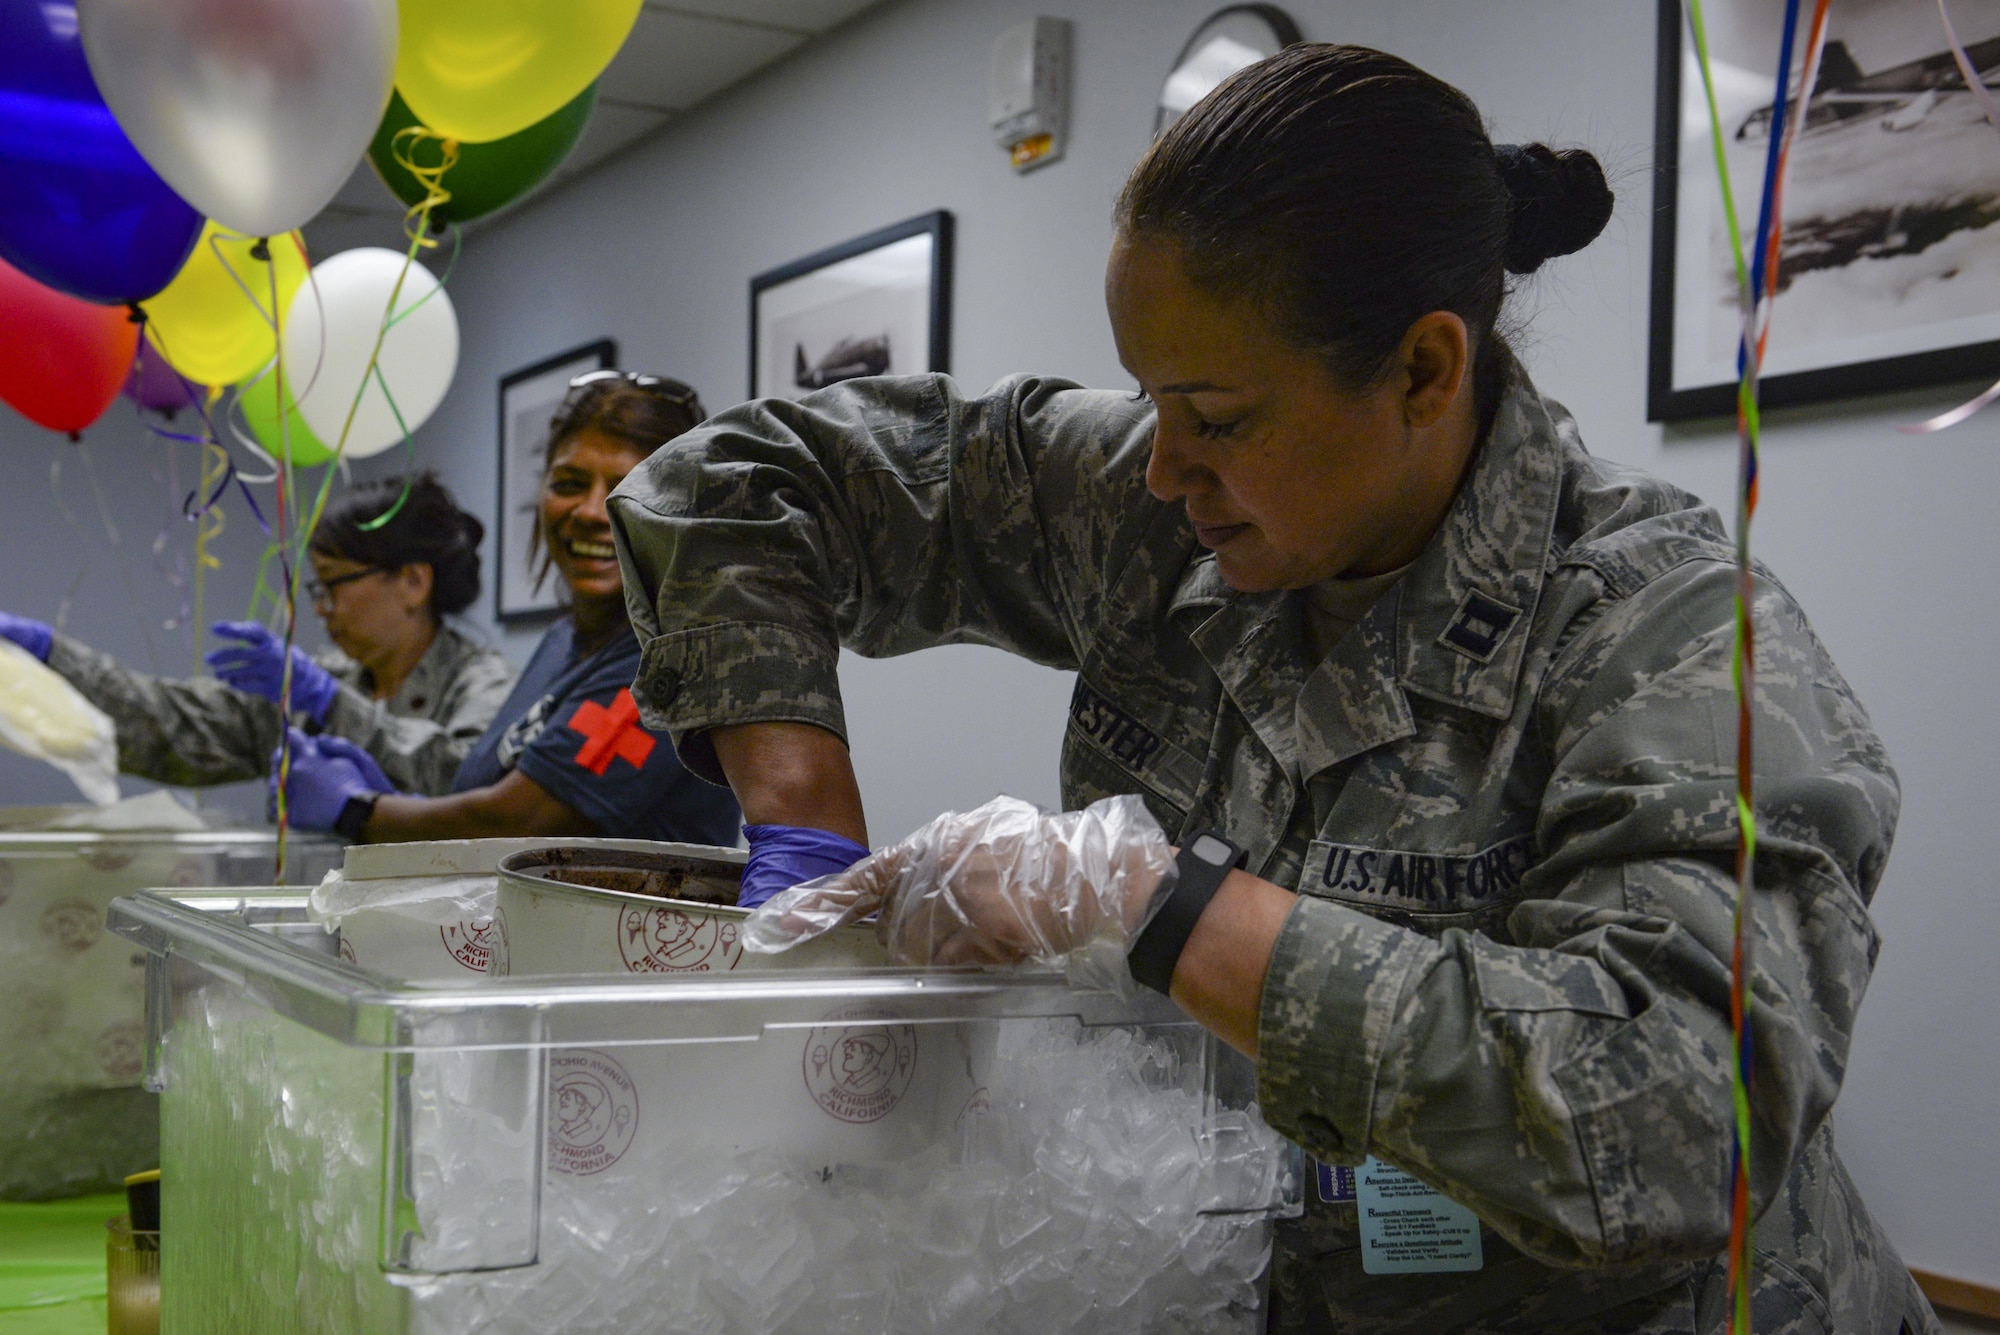 Capt. Marisa Hester, 99th Medical Group Intensive Care Unit student mentoring and retention team nurse cadre, scoops ice cream during the ice cream social in the Mike O’Callaghan Medical Center at Nellis Air Force Base, Nev., May 11, 2017. The ice cream social was just one of several events that took place for Nurse Technician Week. (U.S. Air Force photo by Airman 1st Class Nathan Byrnes/Released)